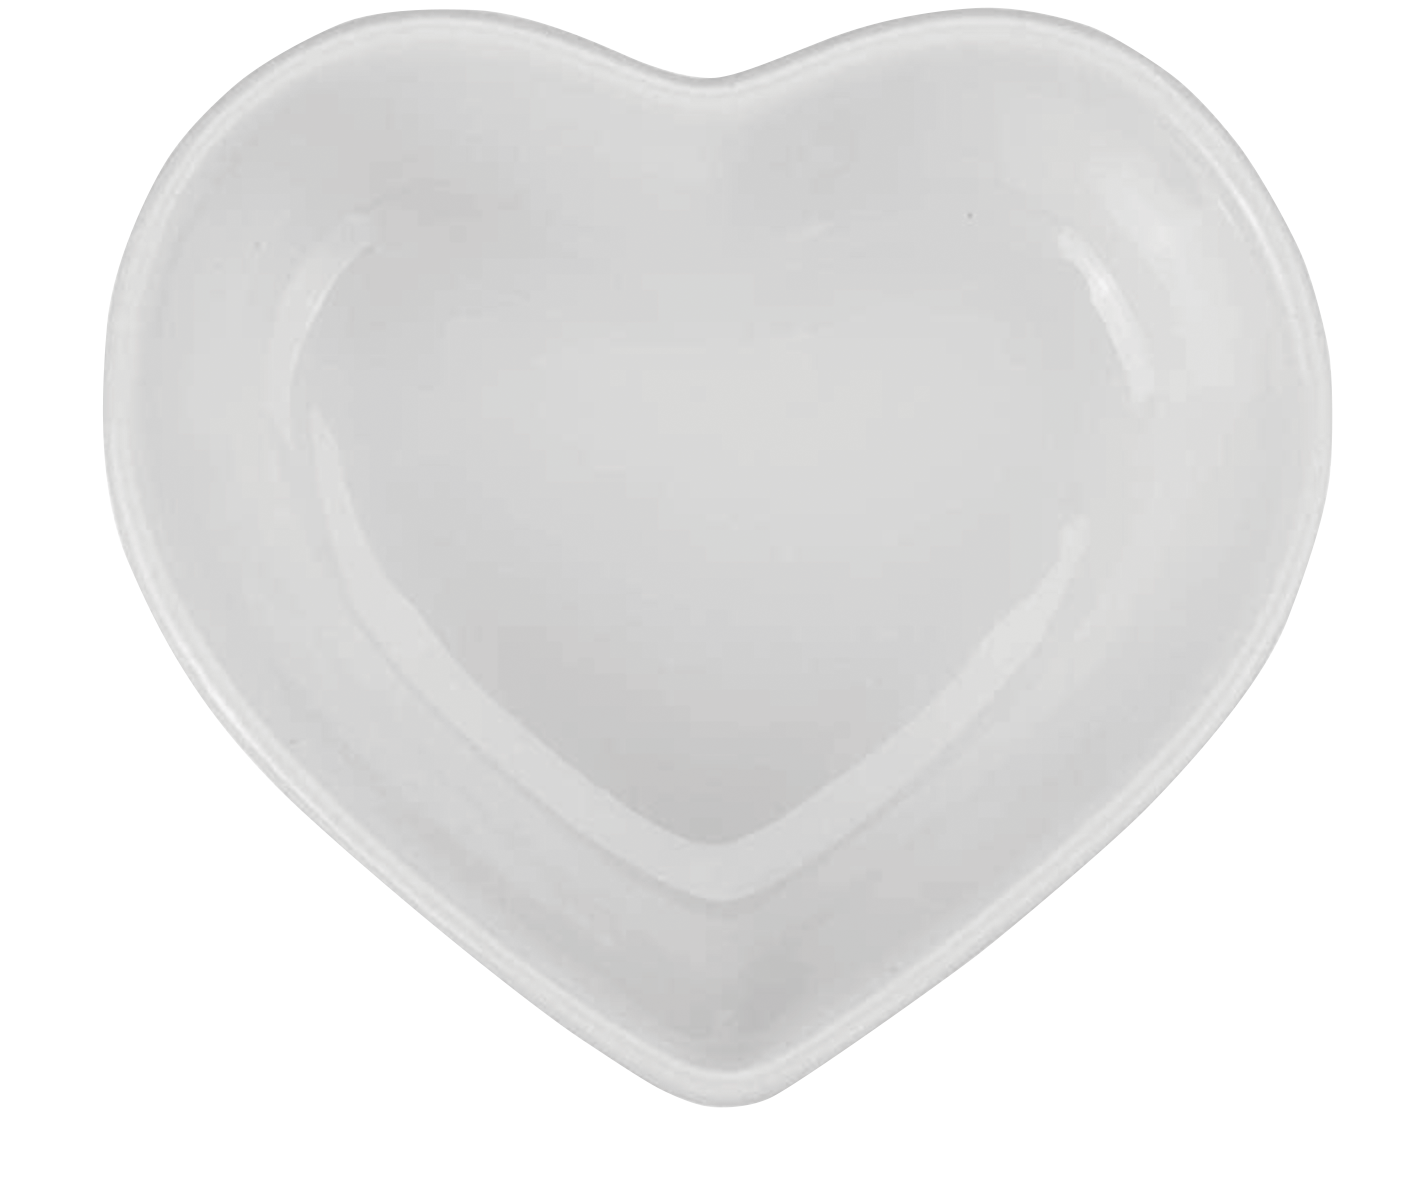 HEART SHAPED SAUCE TRAY GIVEAWAY